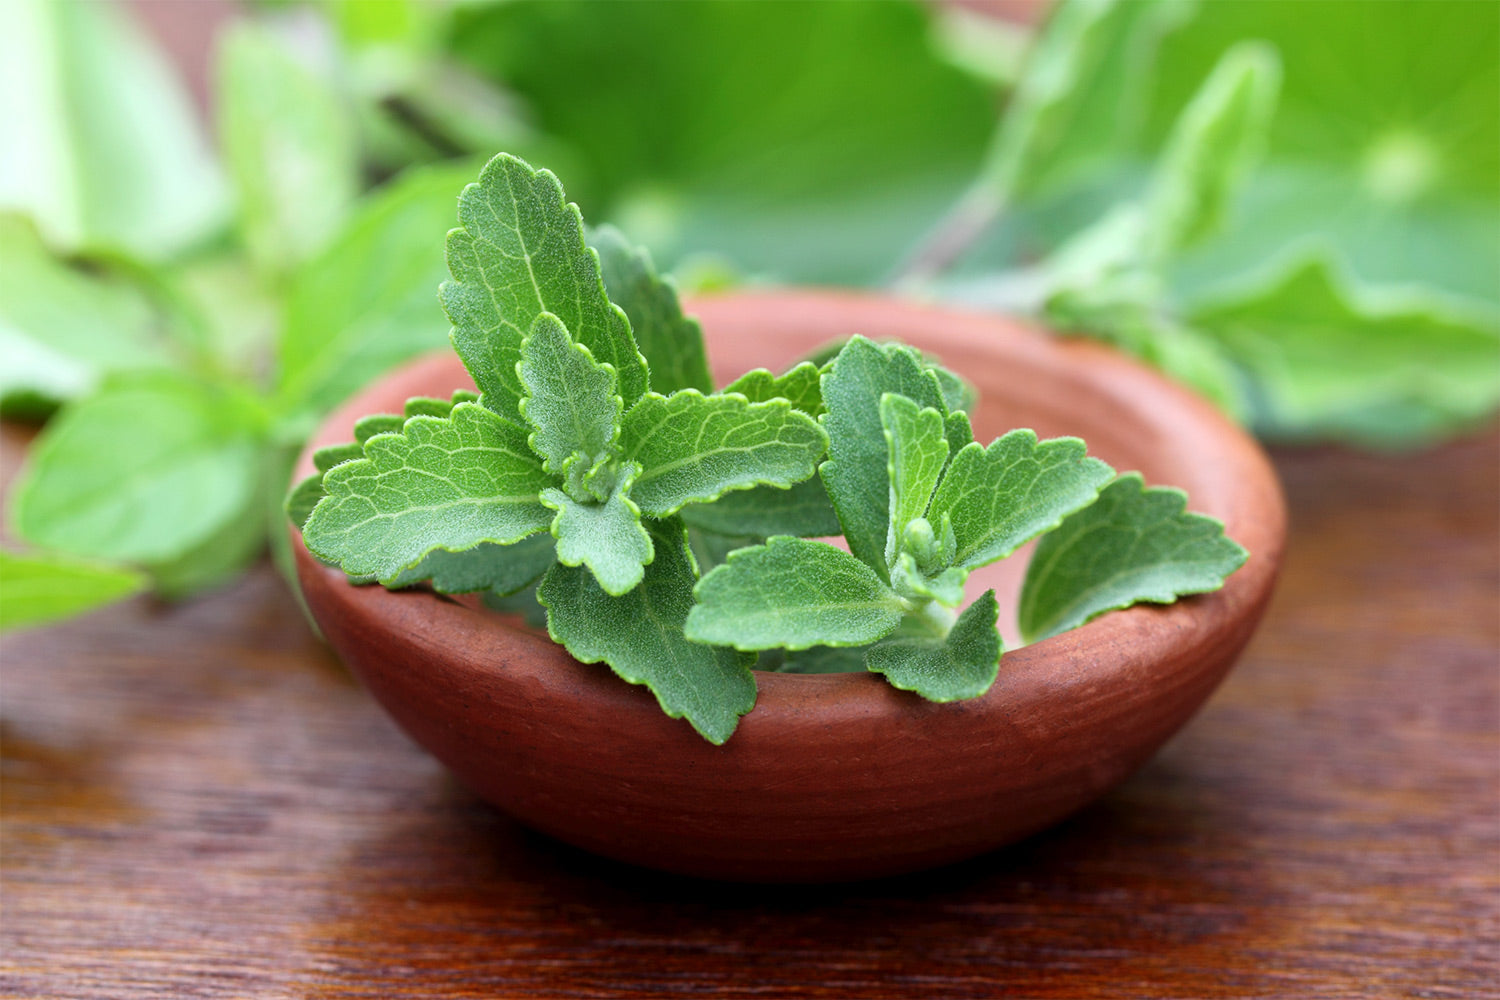 Stevia plant in a wooden bowl